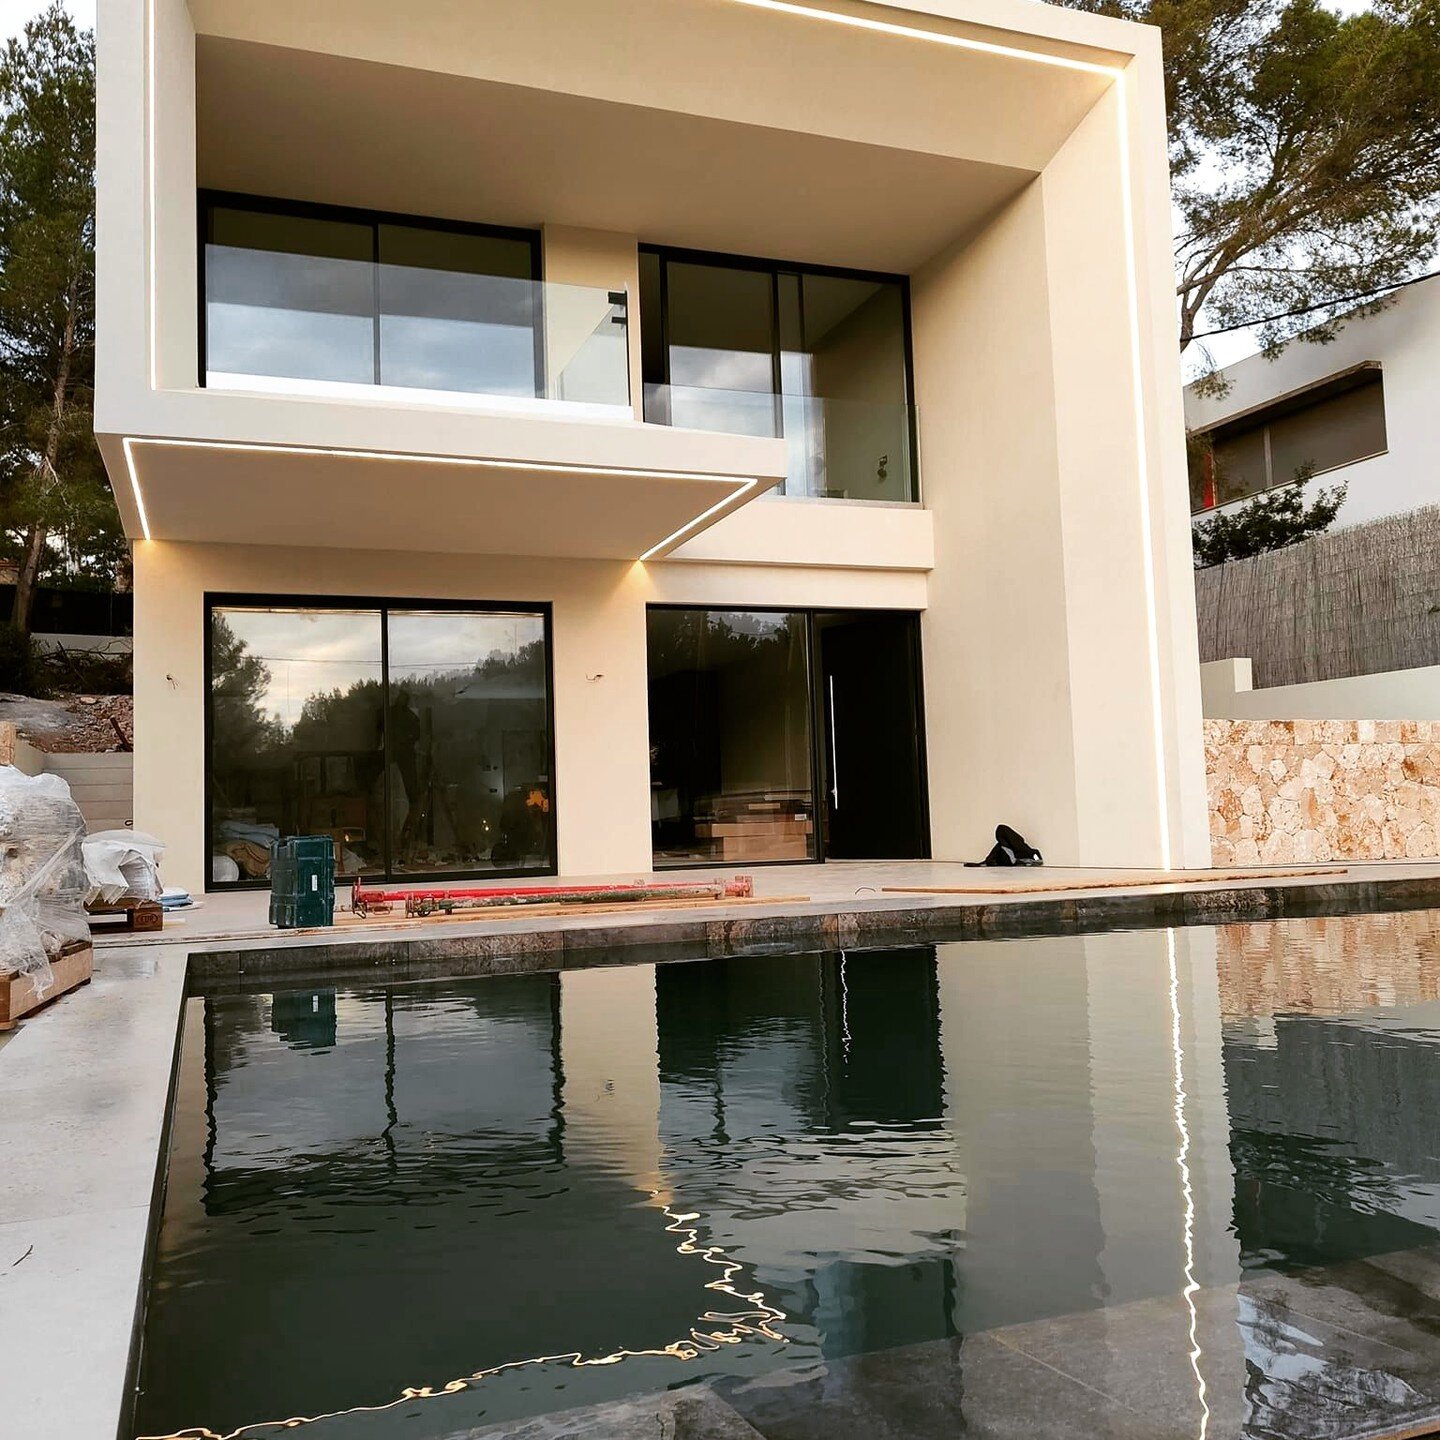 Elegance in Progress! Our latest modern villa project in #mallorca is reaching its final stages, and we couldn't be more thrilled with the results. 

Stay tuned for the grand reveal! 

My concept brought to life by @A3_luxury_living and the amazing t